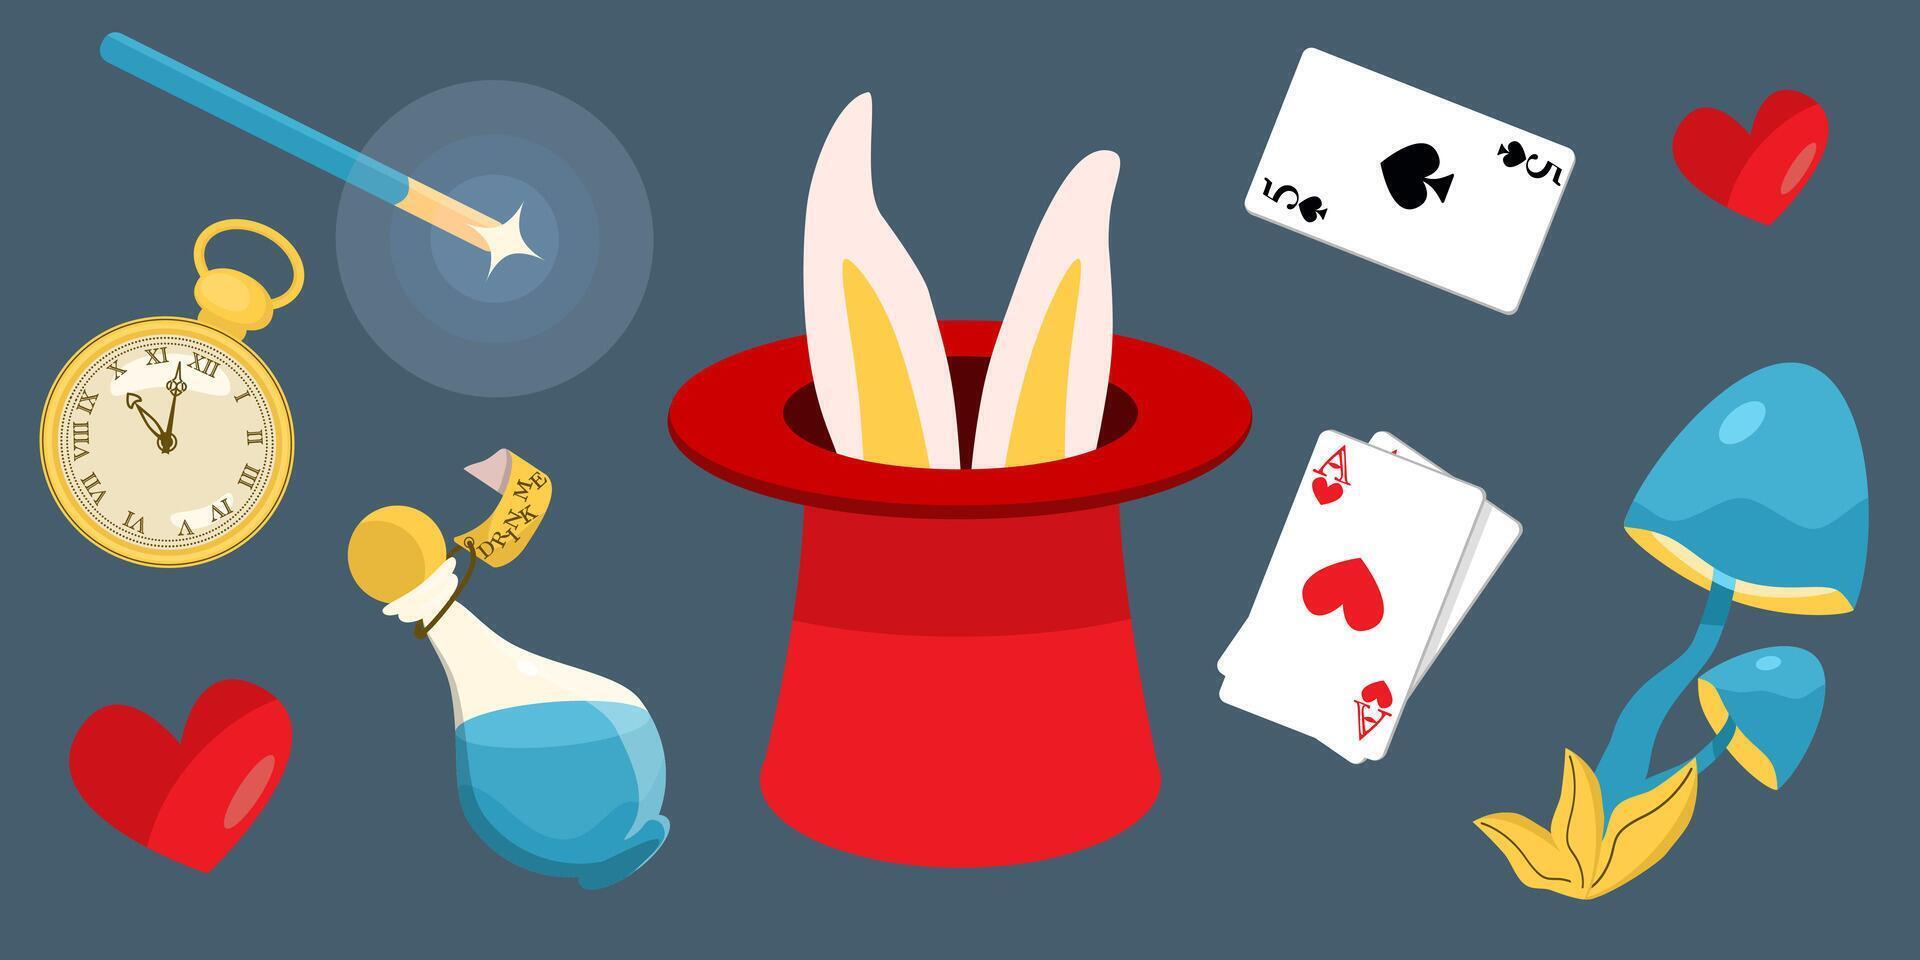 Magician Hat with Bunny Ears, game cards, clock, bottle, magic mushroom, vector elements set from Alice in Wonderland, cartoon flat style.